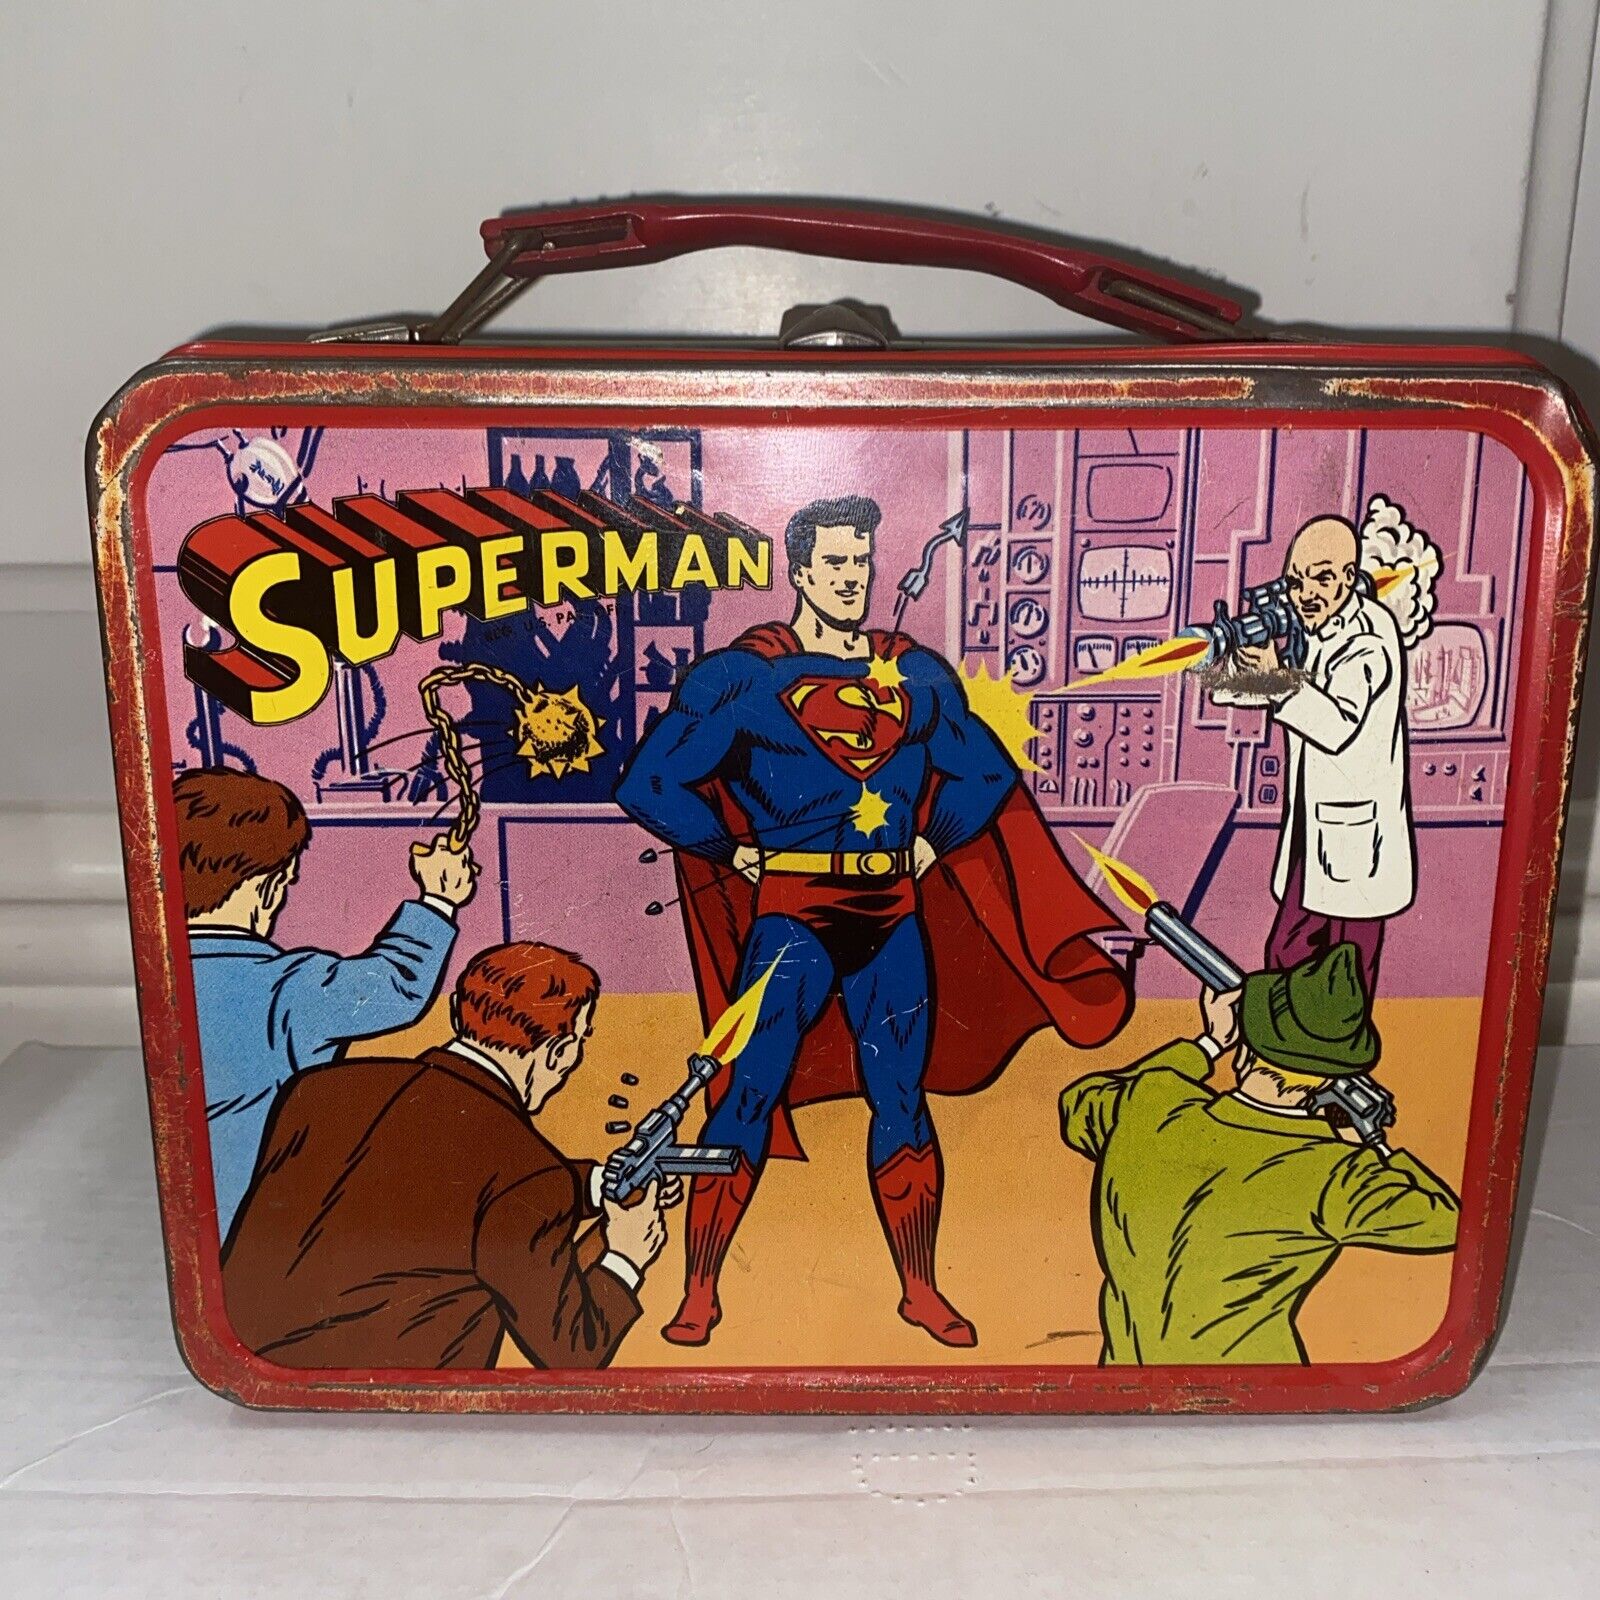 1967 Vintage Superman Metal Lunchbox Lunch Box Matching Thermos